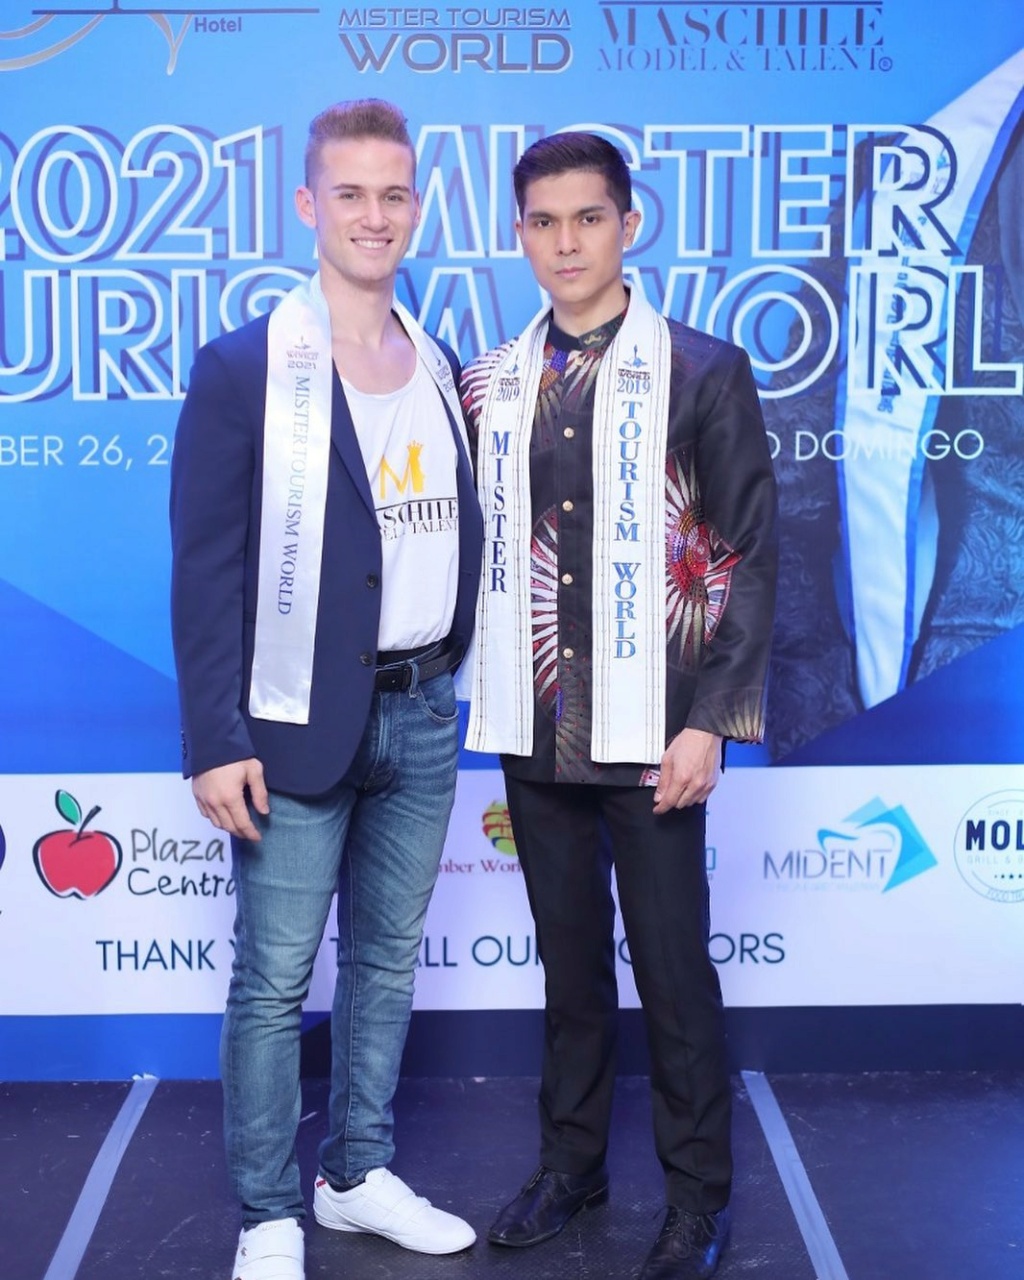 5th Mister Tourism World 2020/2021 is Dominican Republic - Page 2 26065010